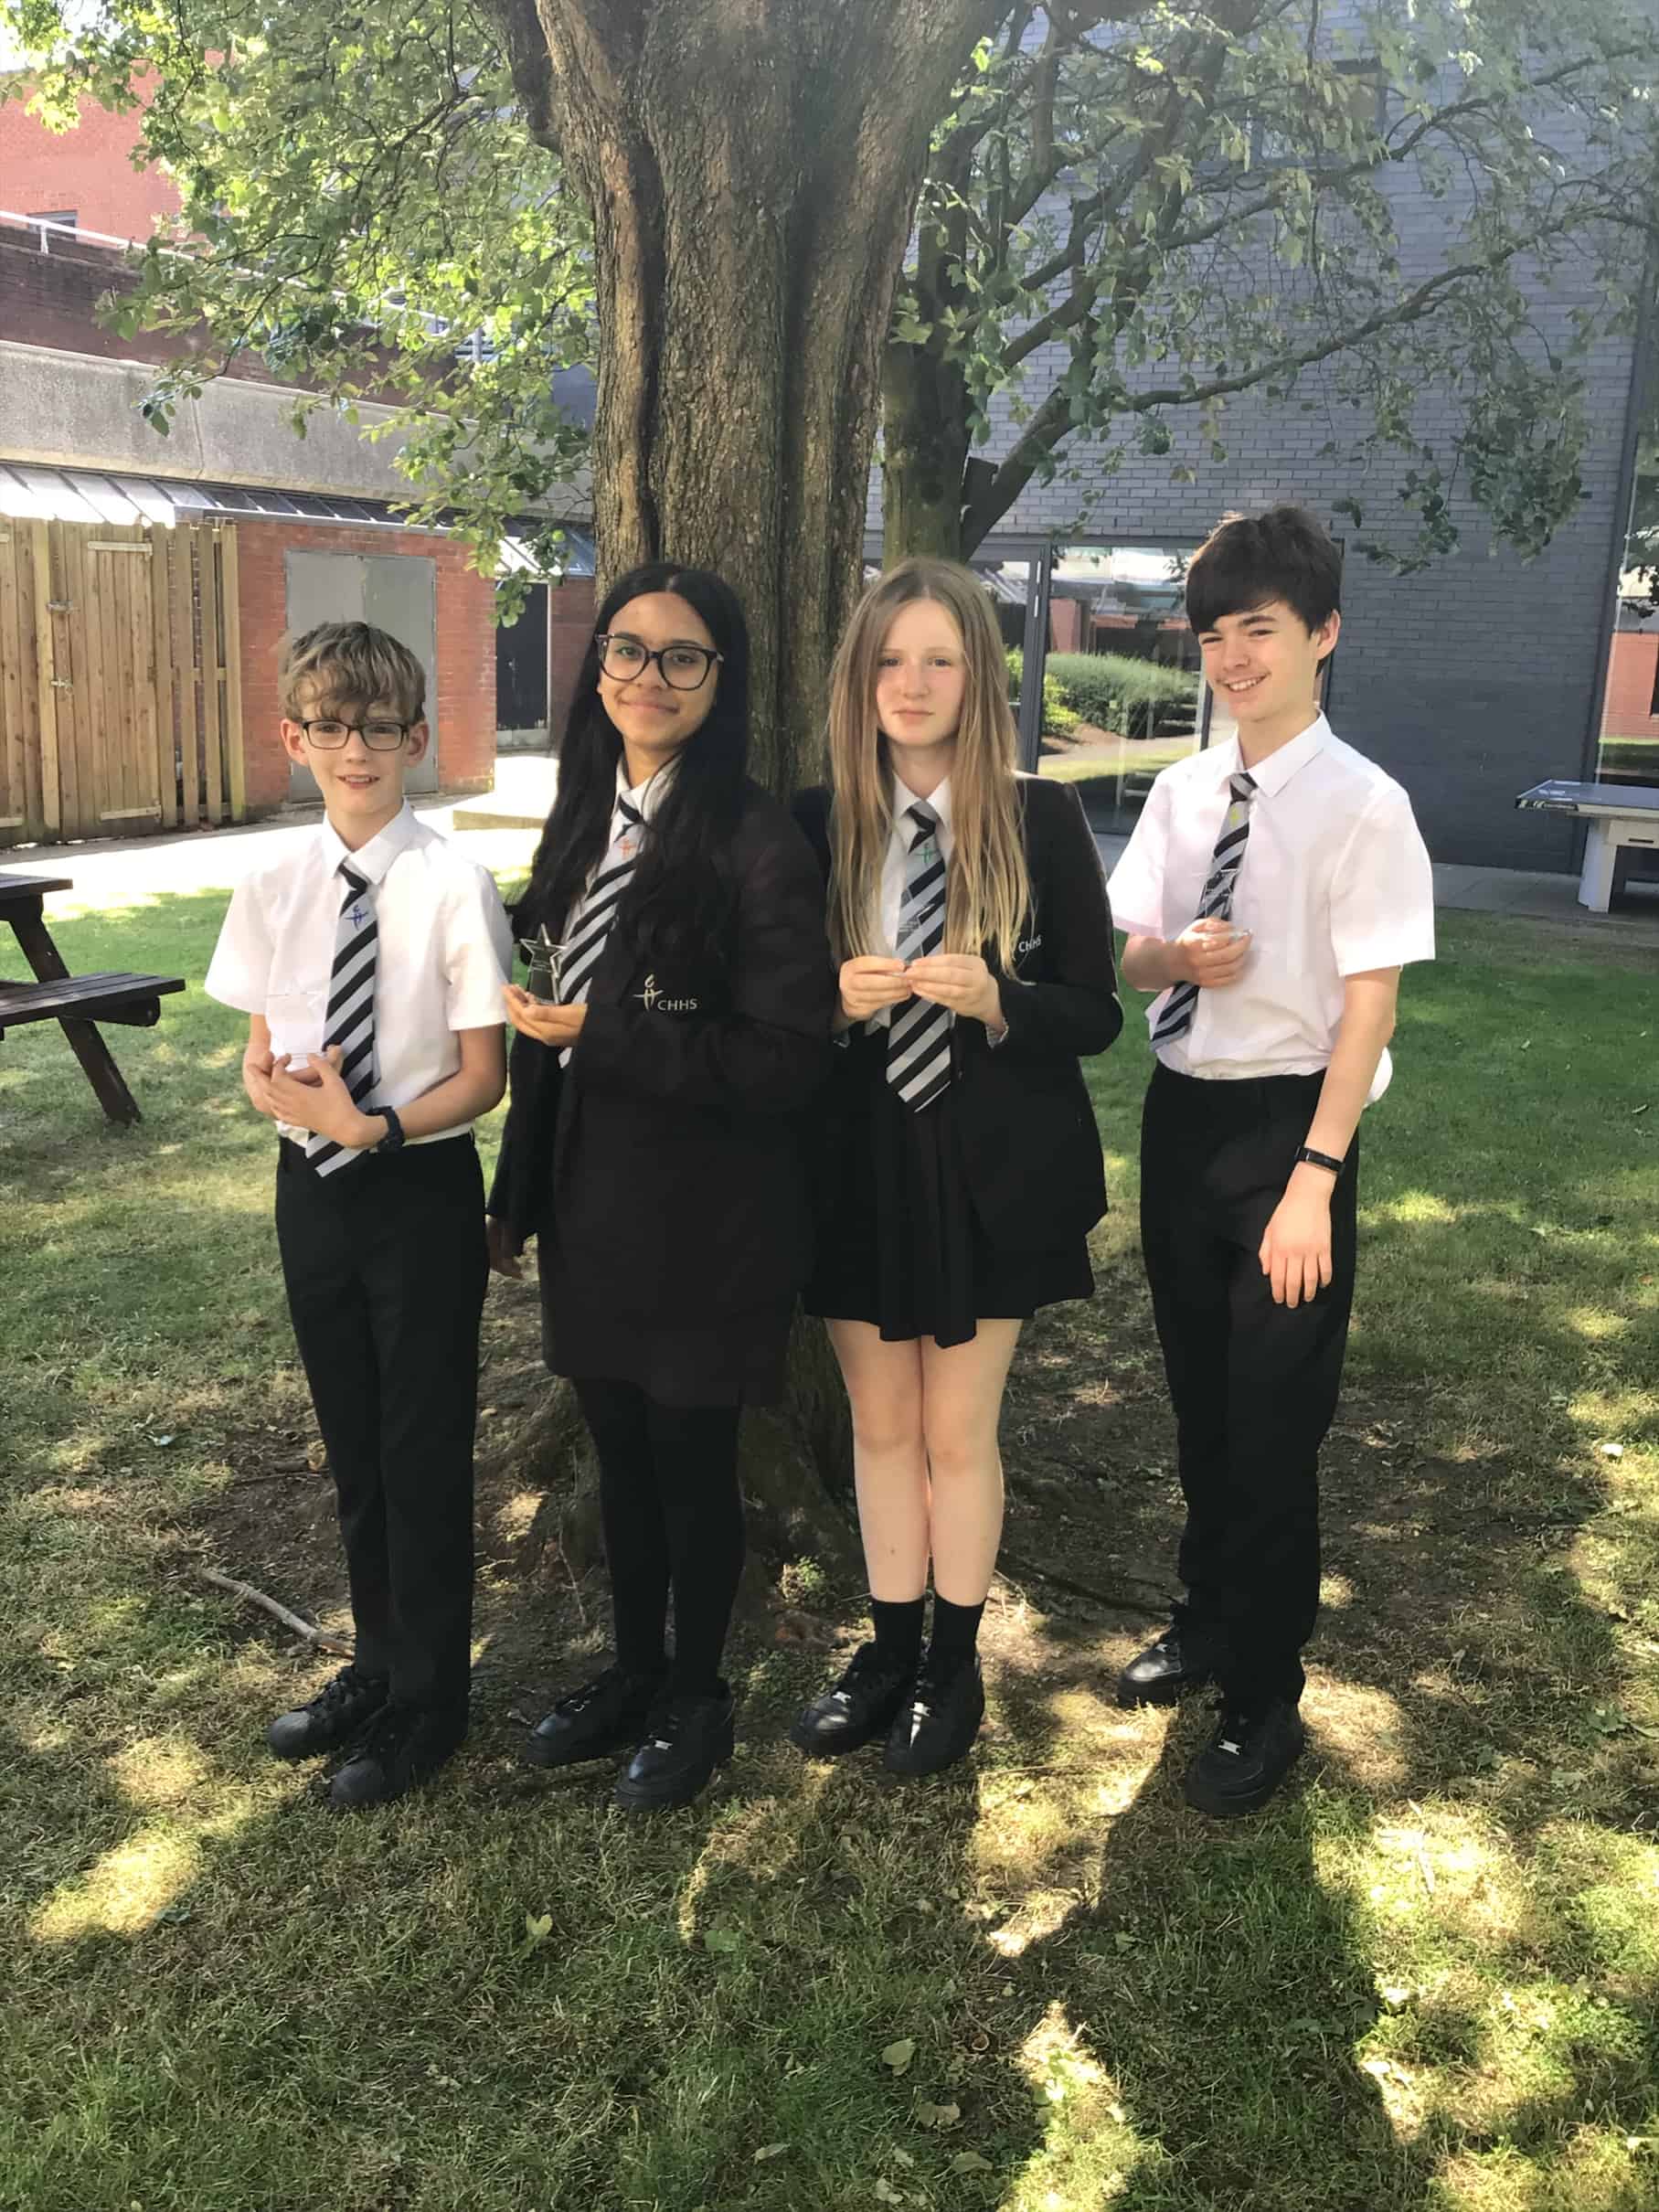 Four Cheadle Hulme High School students stand outside smiling and holding their Kathryn Oliver Leonard Teamwork trophies, earned from the Chemquiz